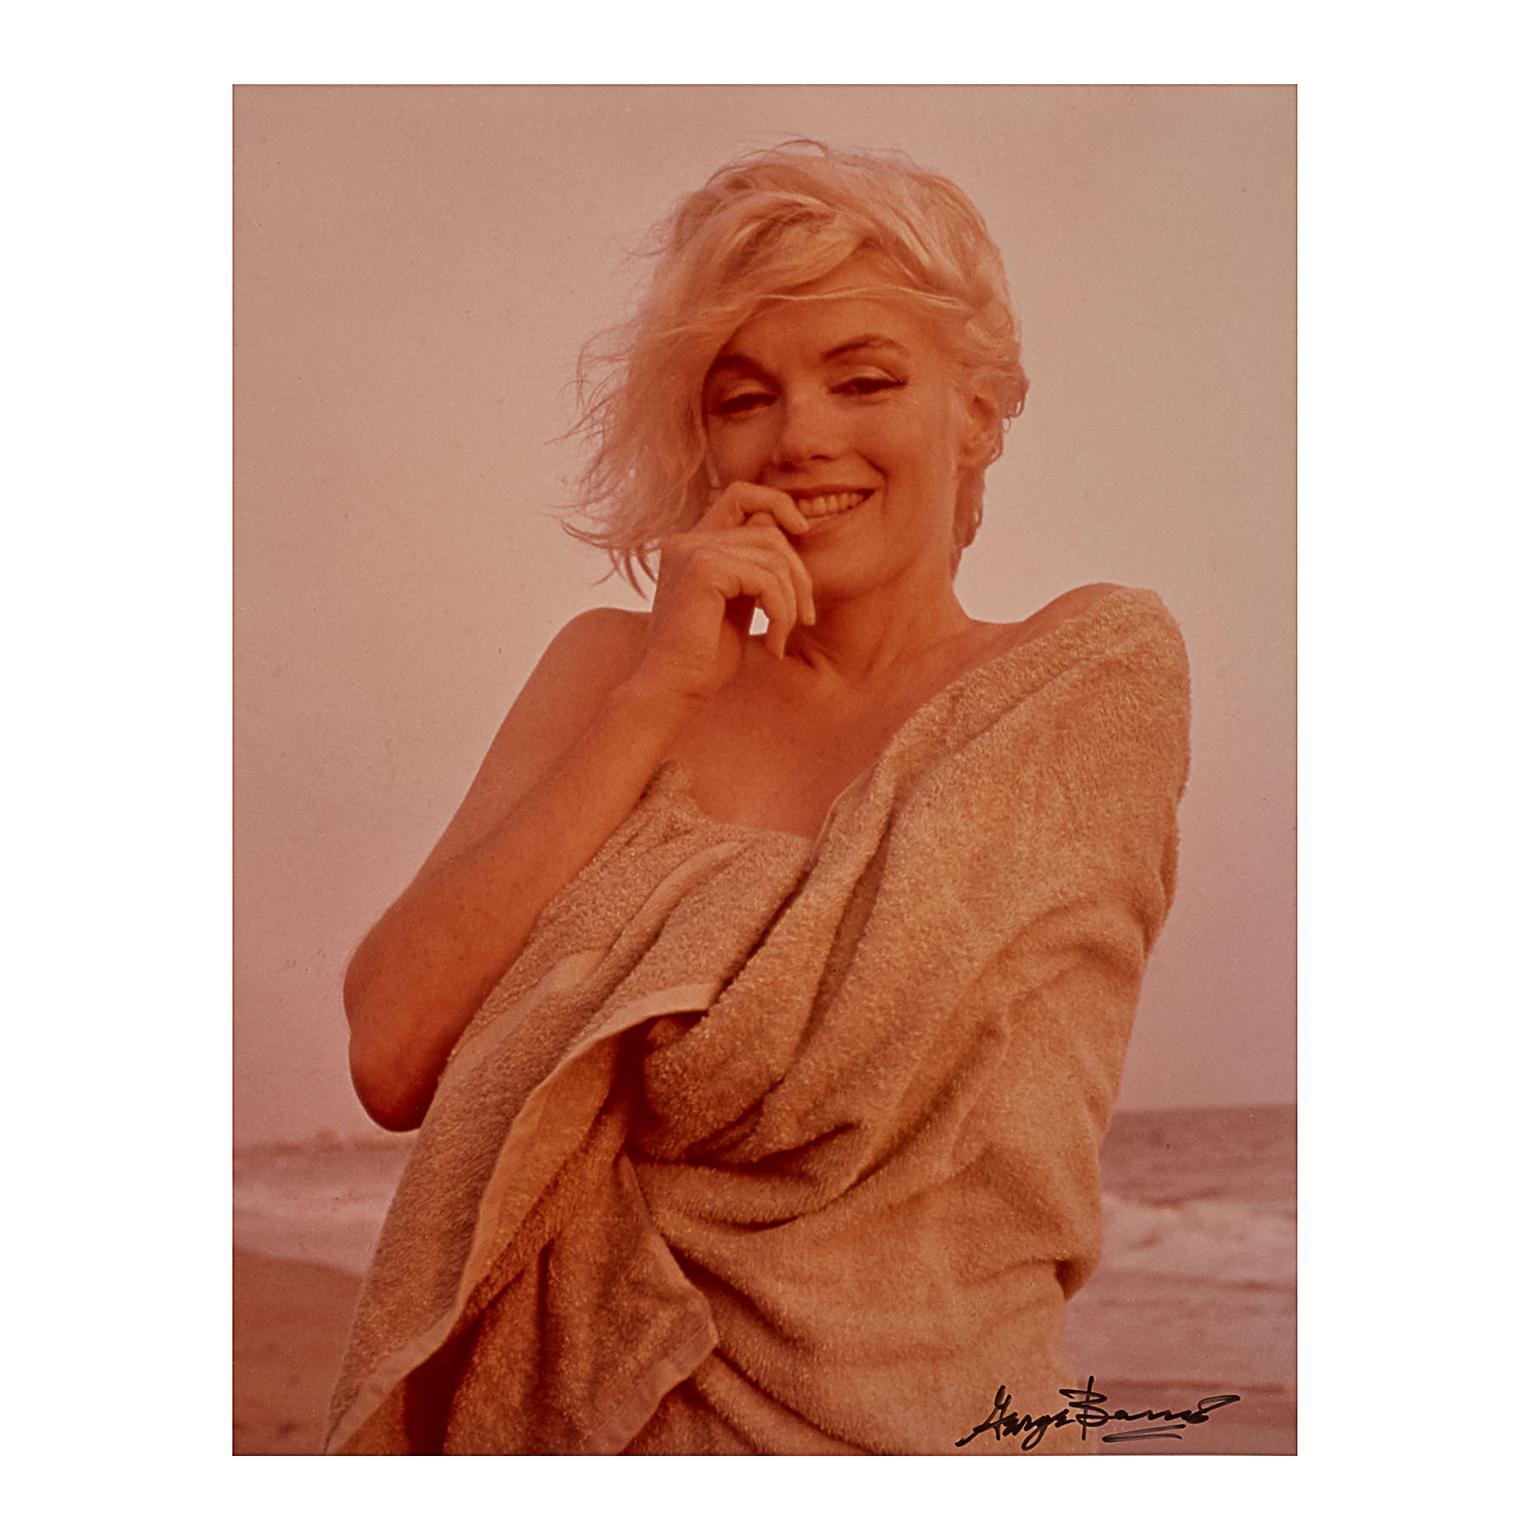 This captivating chromogenic print of Marilyn wrapped in a towel was personally produced and signed by George Barris in 1987. It measures 13-1/2 x 10-1/4 inches (34.3 x 26.0cm) and features the artist's signature in ink recto. It is editioned 'A.P'